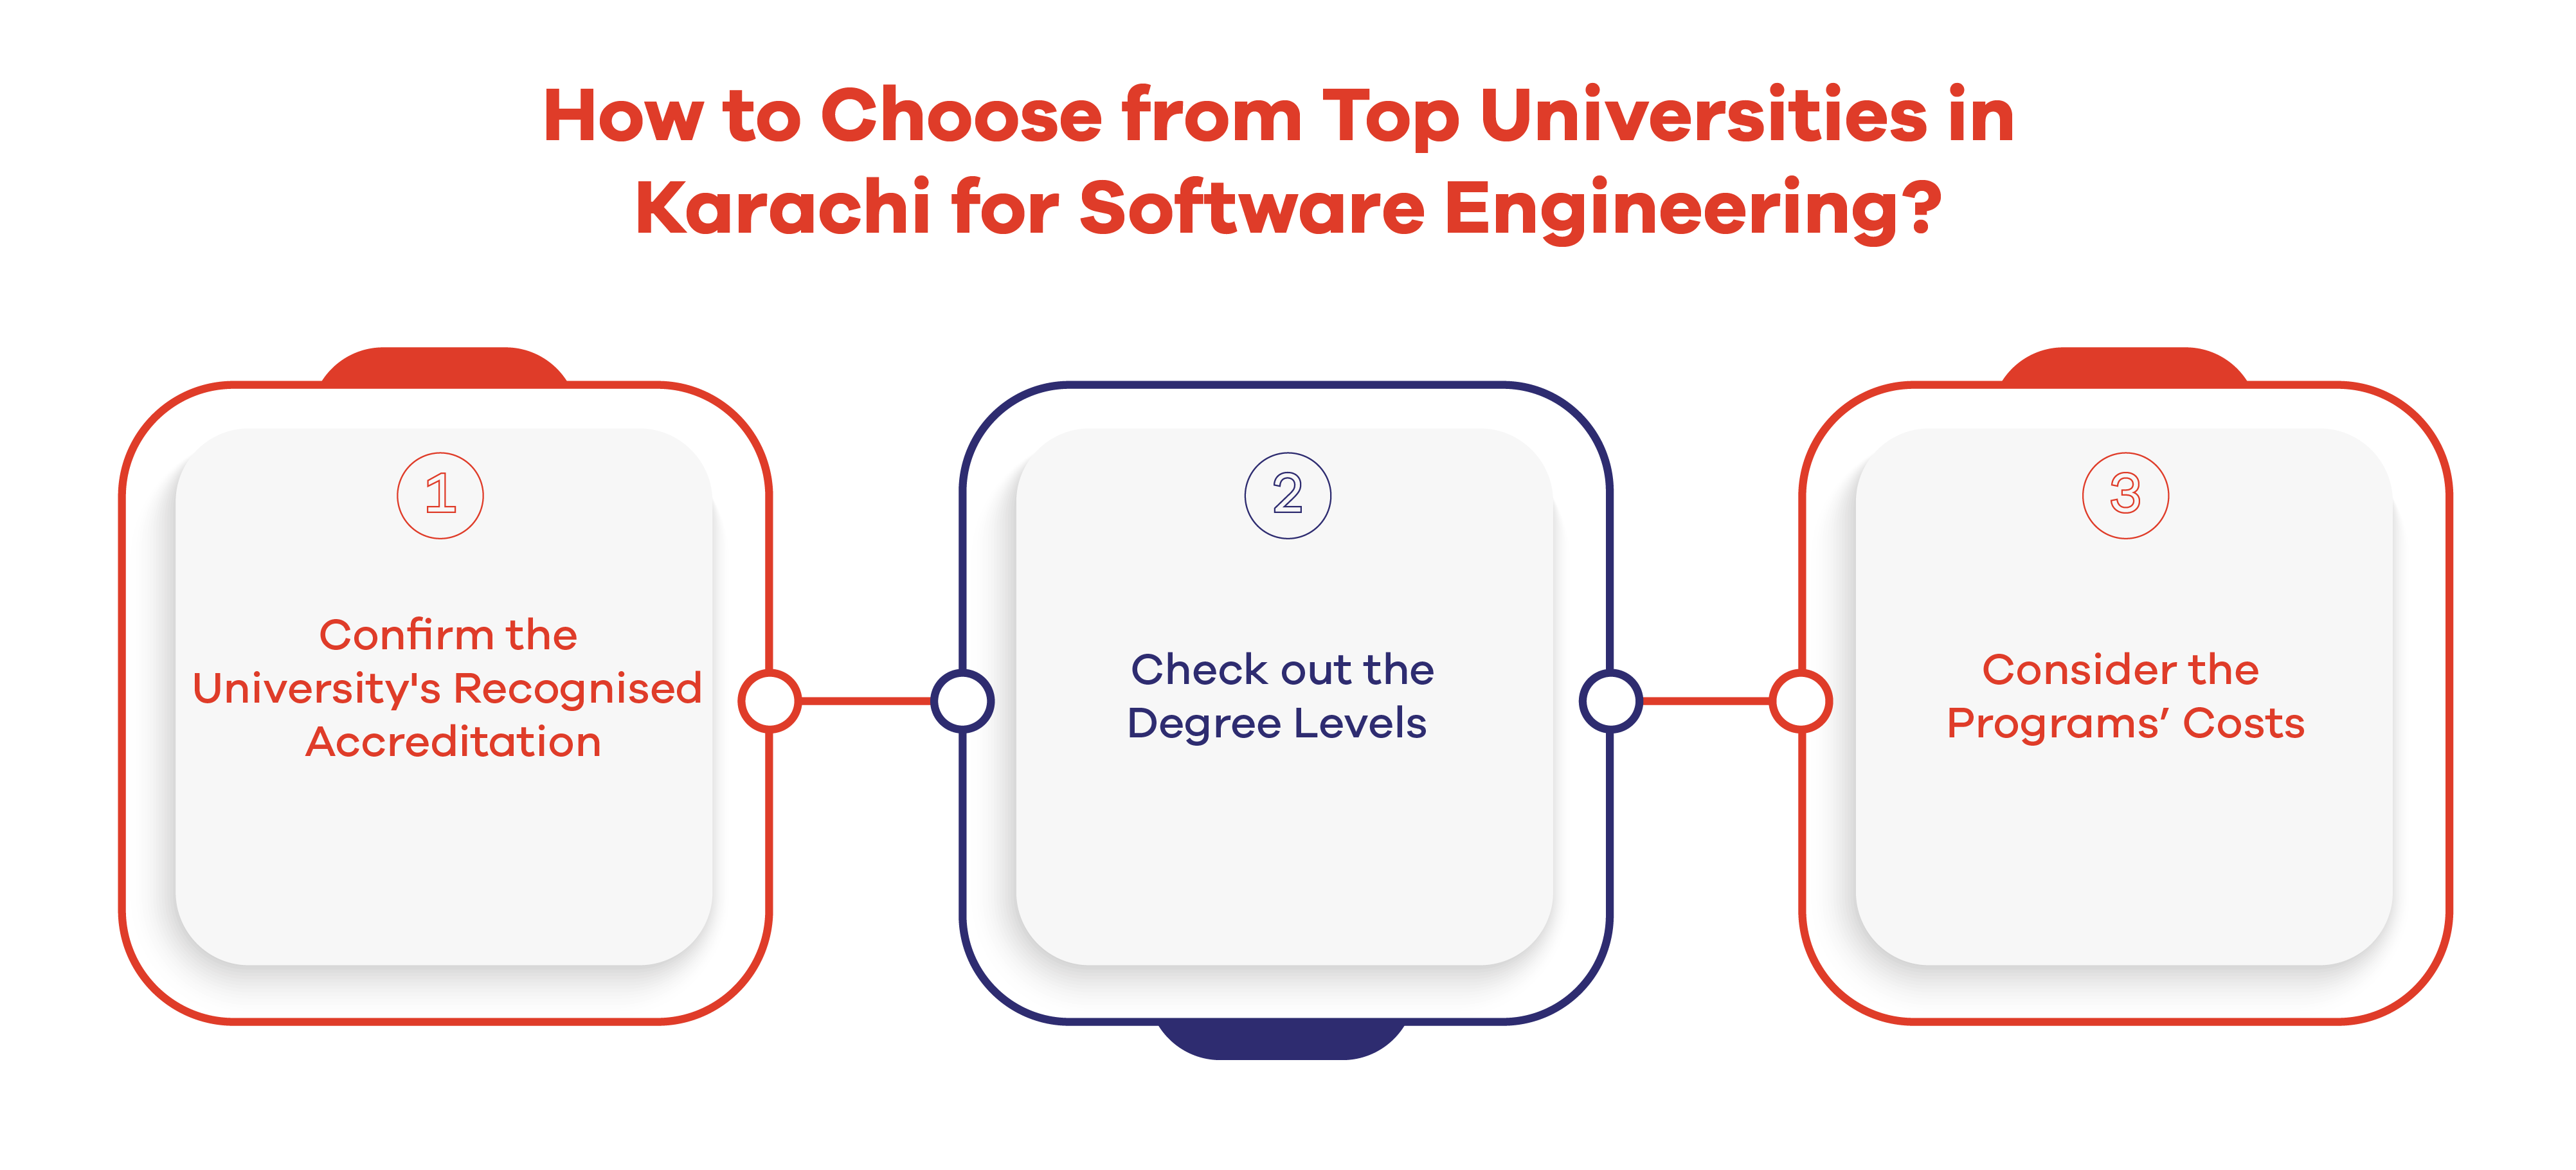 How to Choose from Top Universities in Karachi for Software Engineering? 